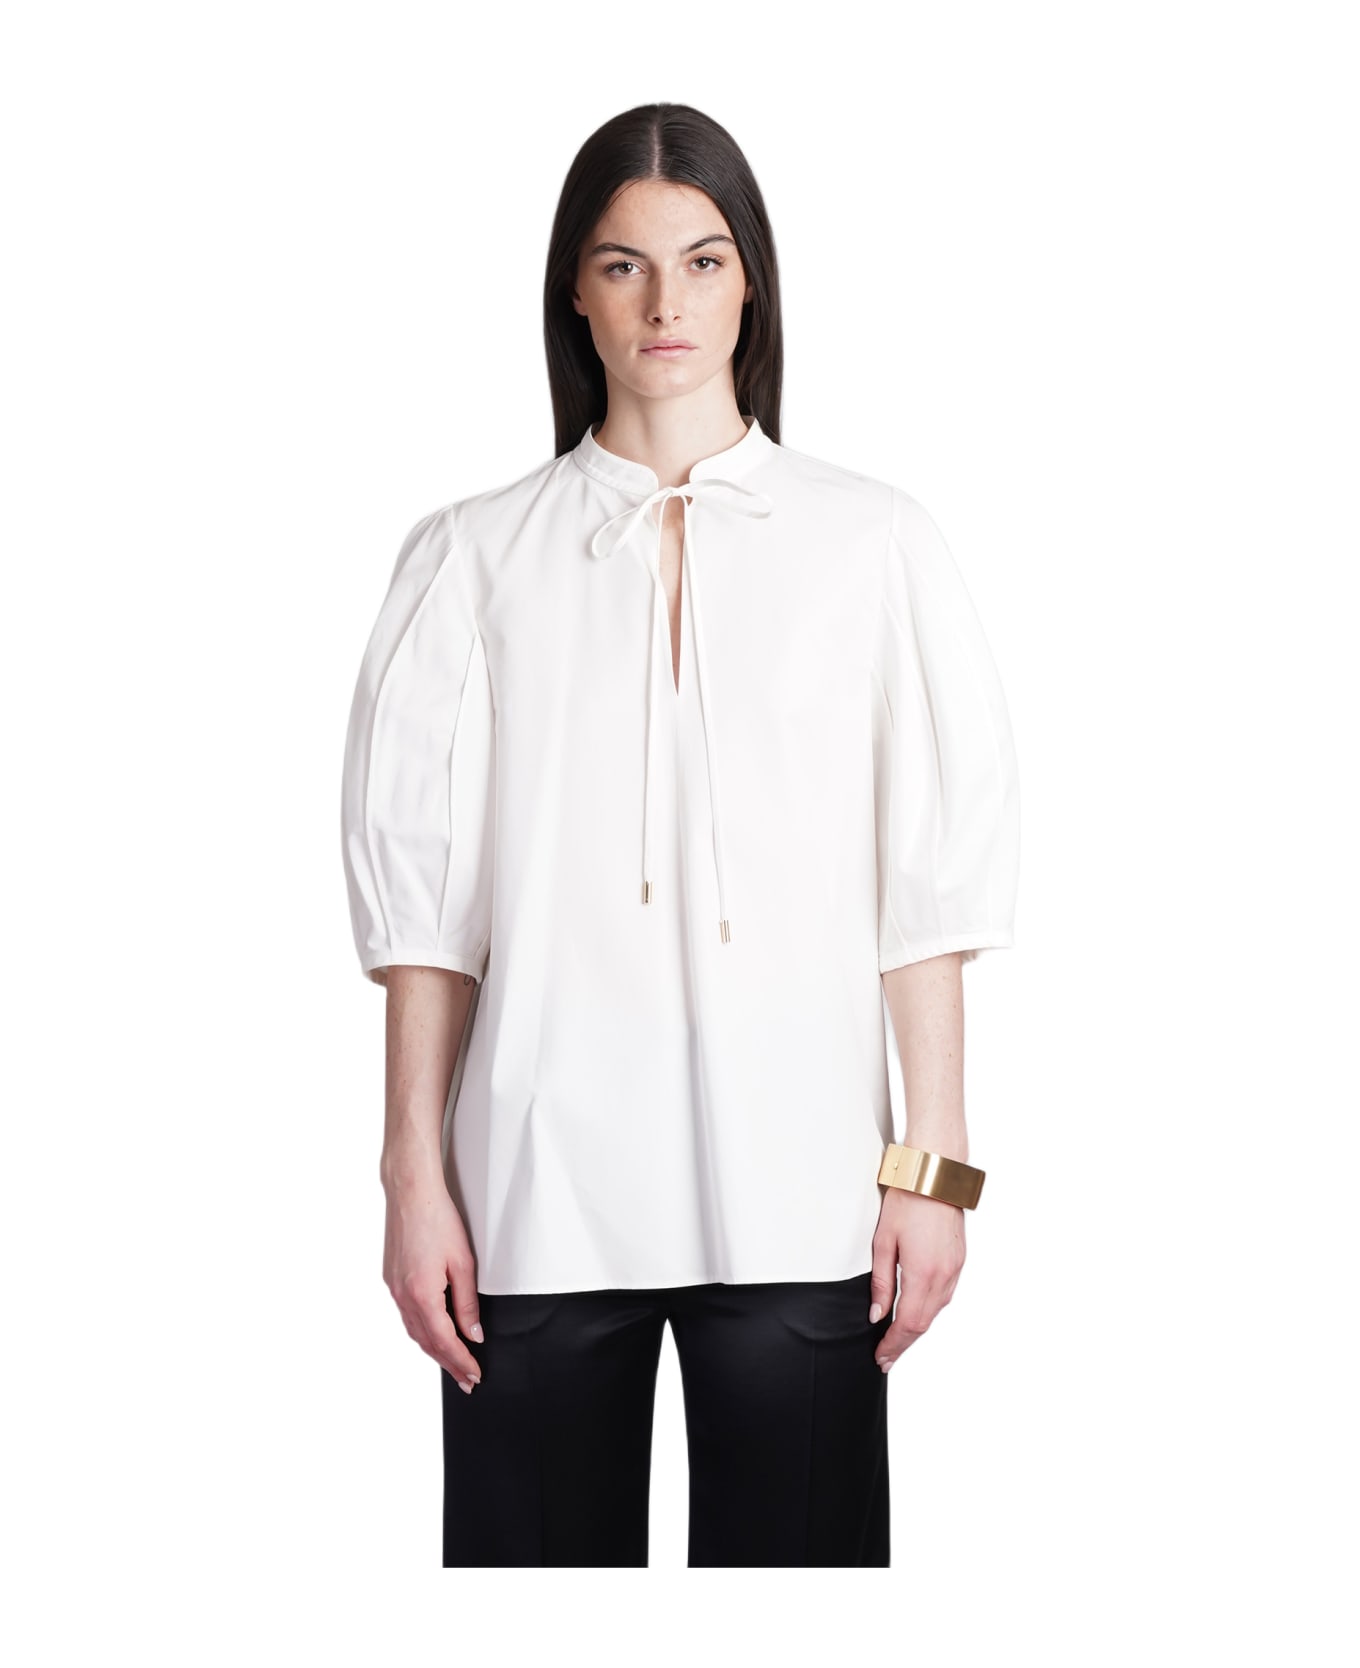 Chloé Blouse In White Cotton - white ブラウス